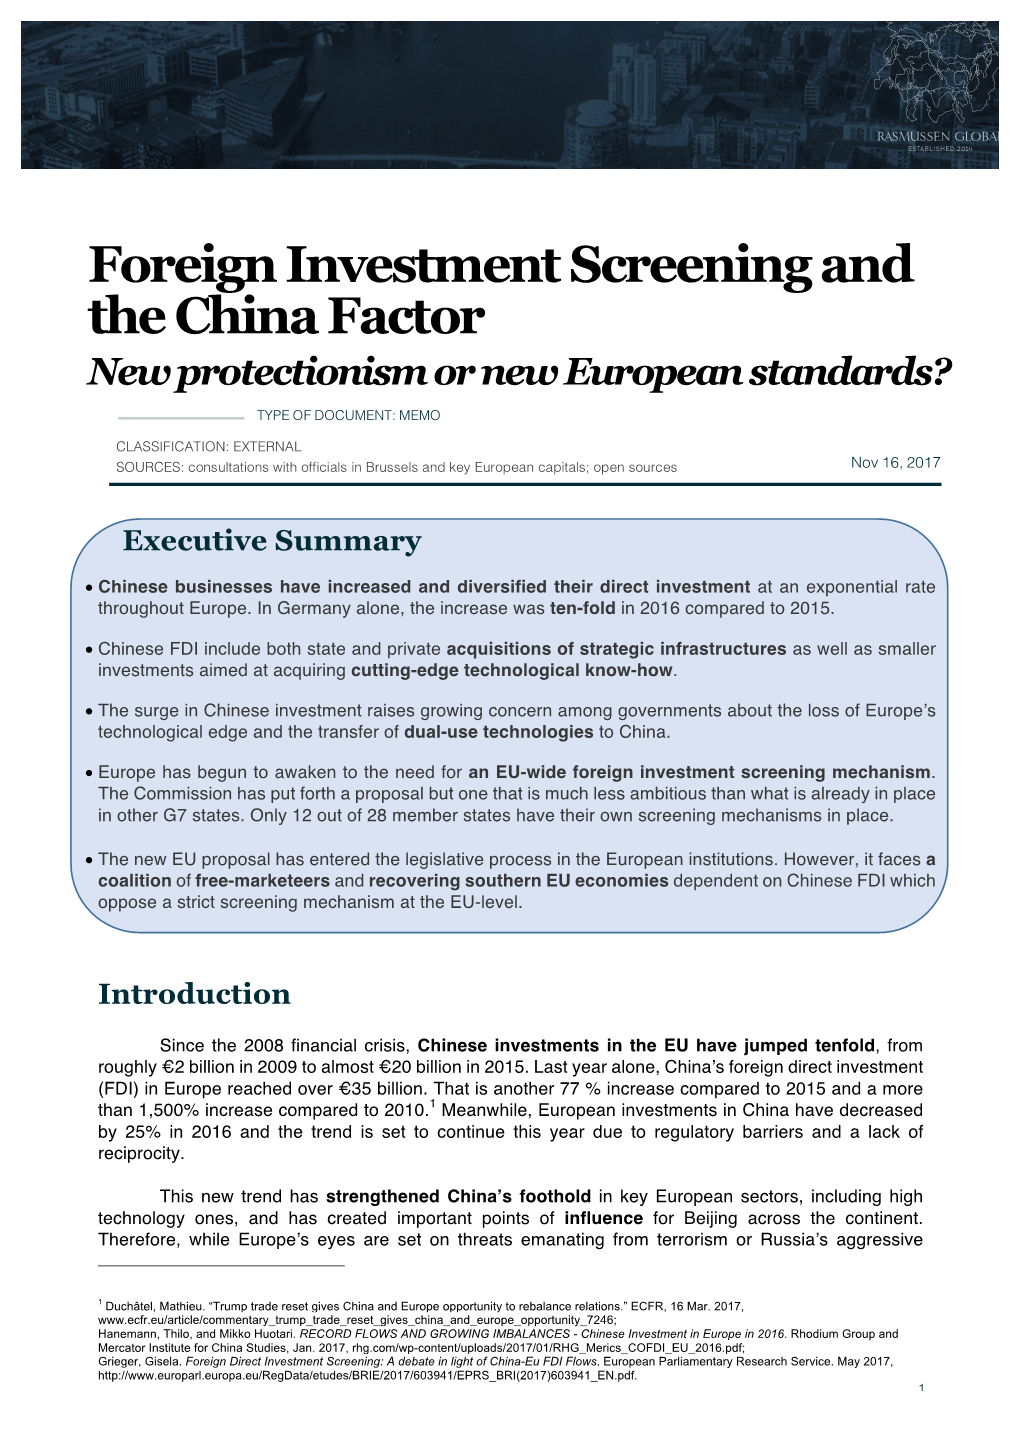 Foreign Investment Screening and the China Factor New Protectionism Or New European Standards?